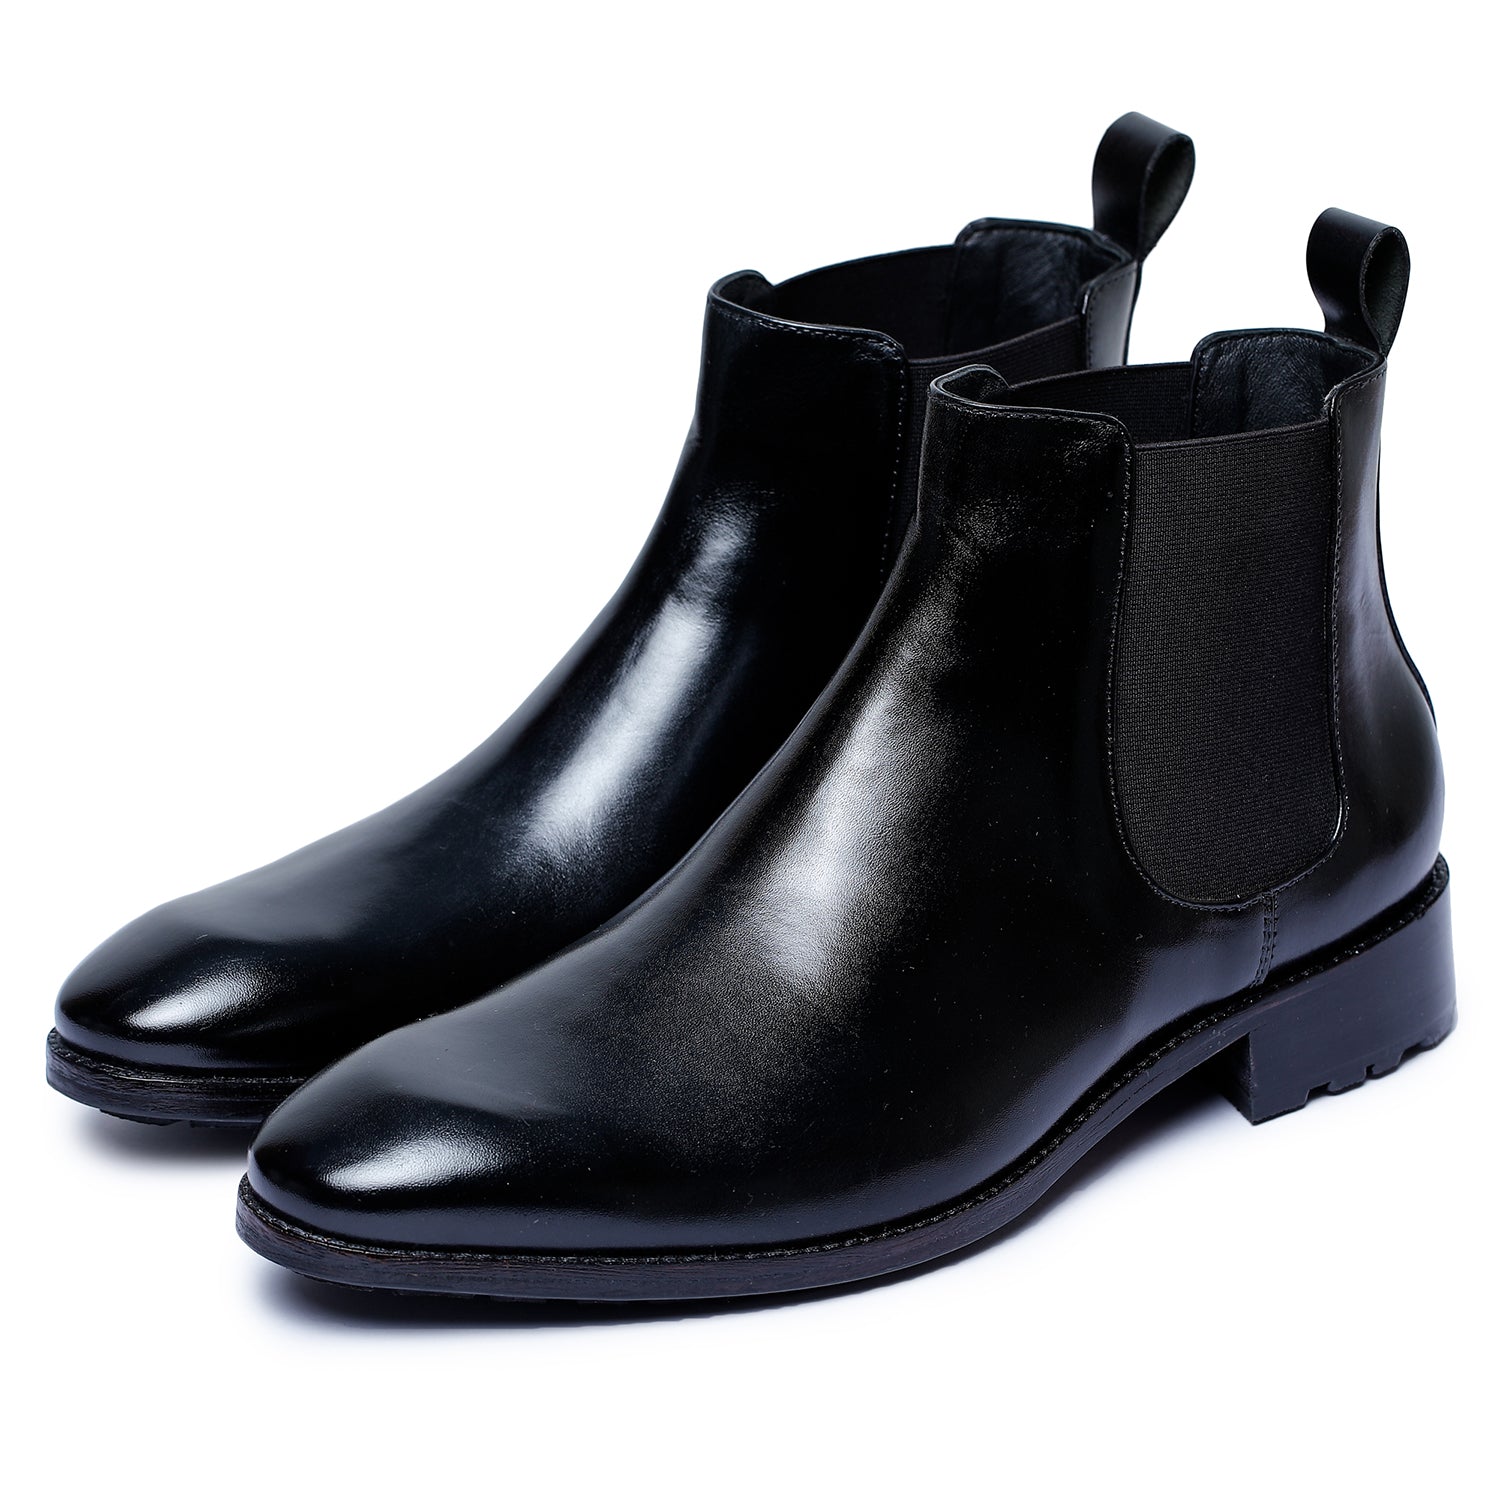 Off-White Man Ankle Boots Black Size 9 Soft Leather